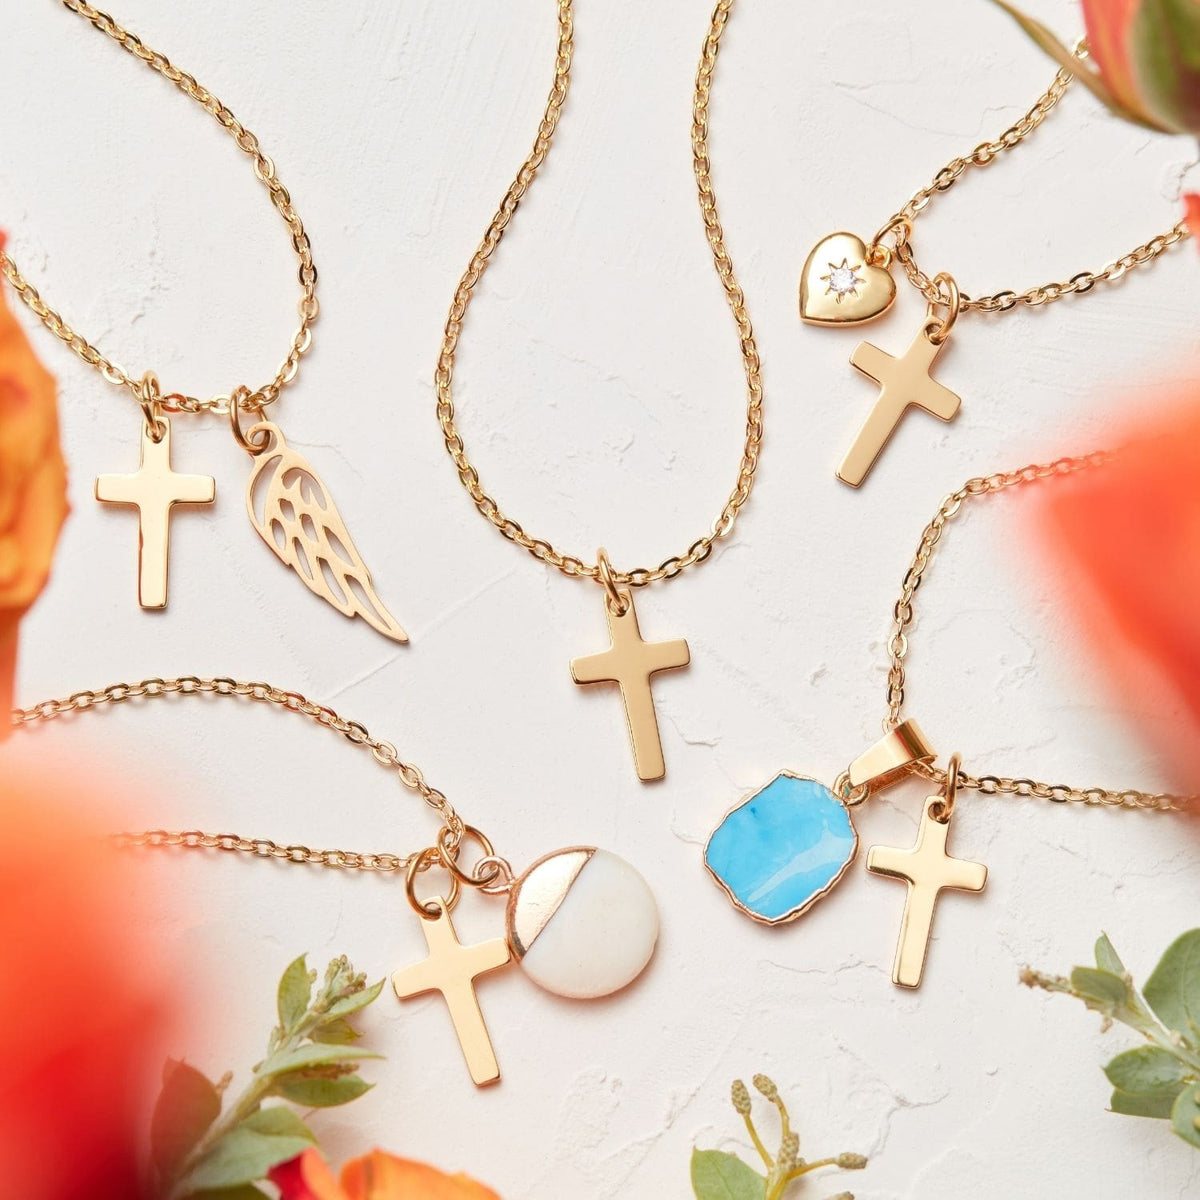 Only a Godmother | Keep Secrets Like a Sister | Cross Necklace